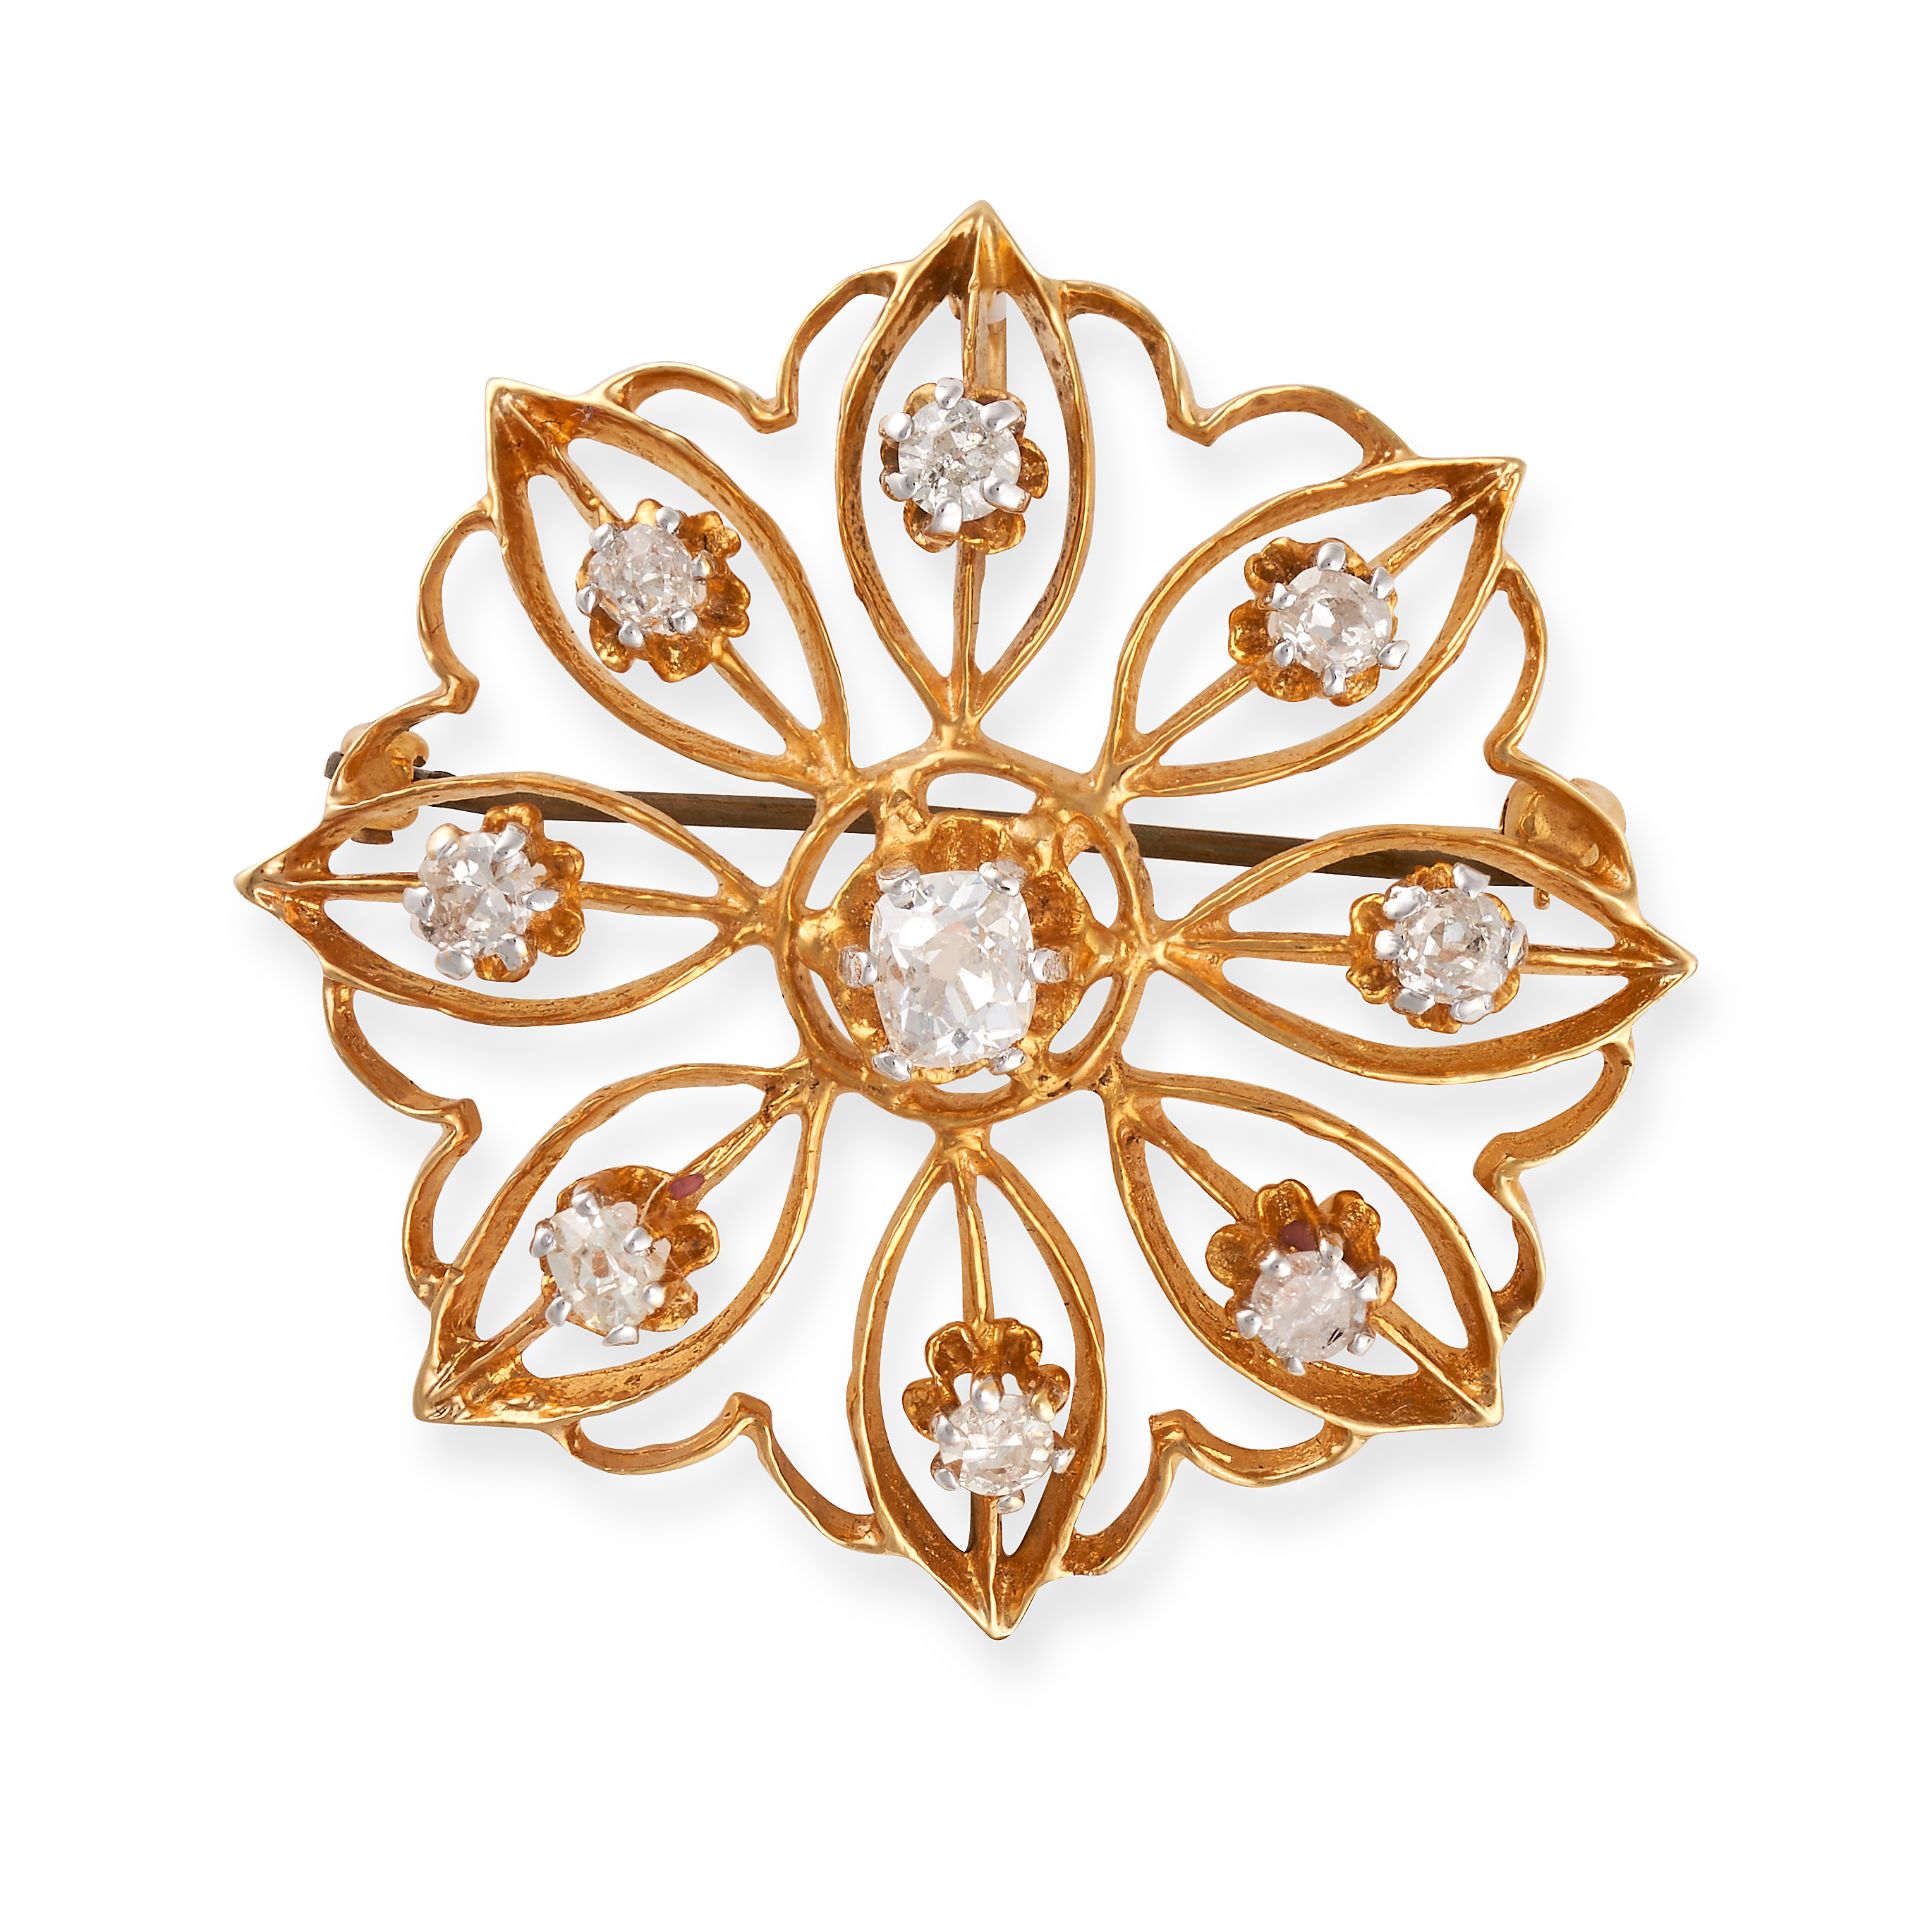 NO RESERVE - A DIAMOND FLOWER BROOCH / PENDANT in yellow gold, designed as an openwork stylised f...